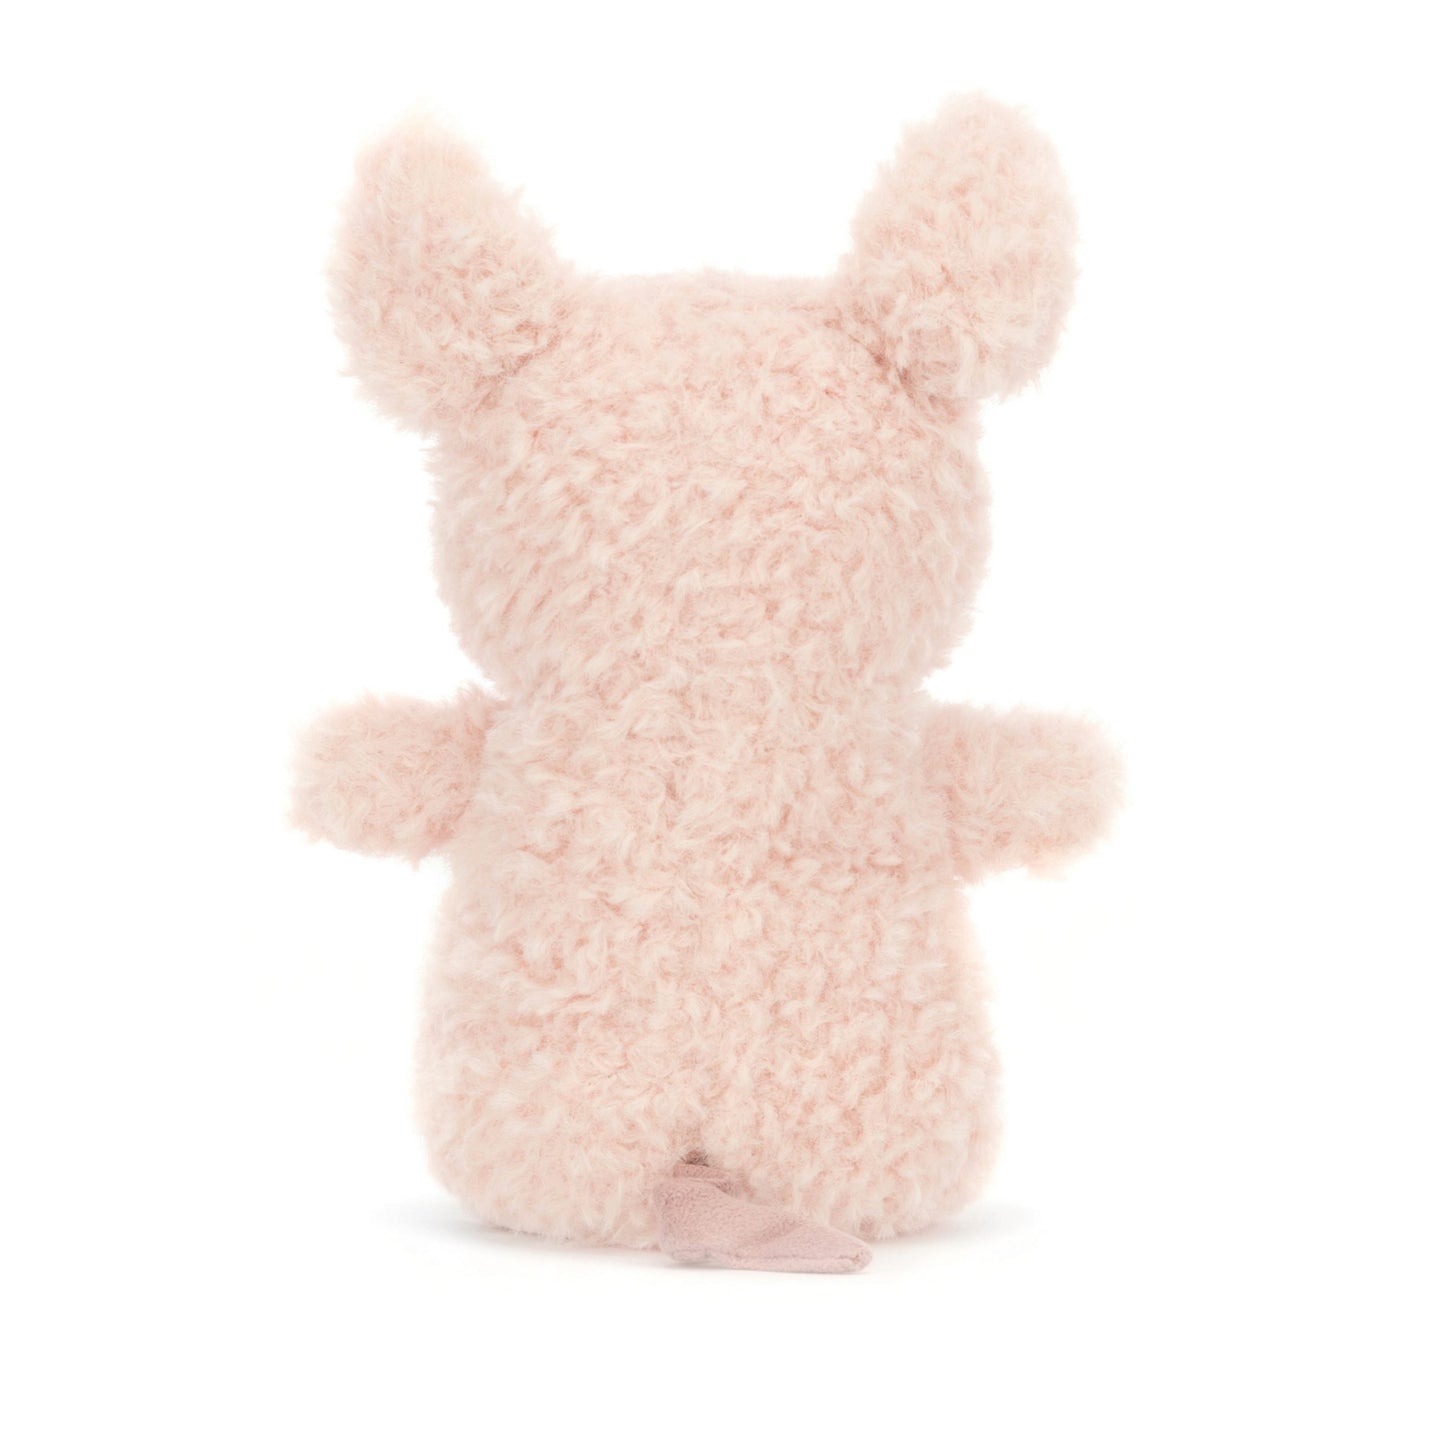 Jellycat Wee Pig (Back)